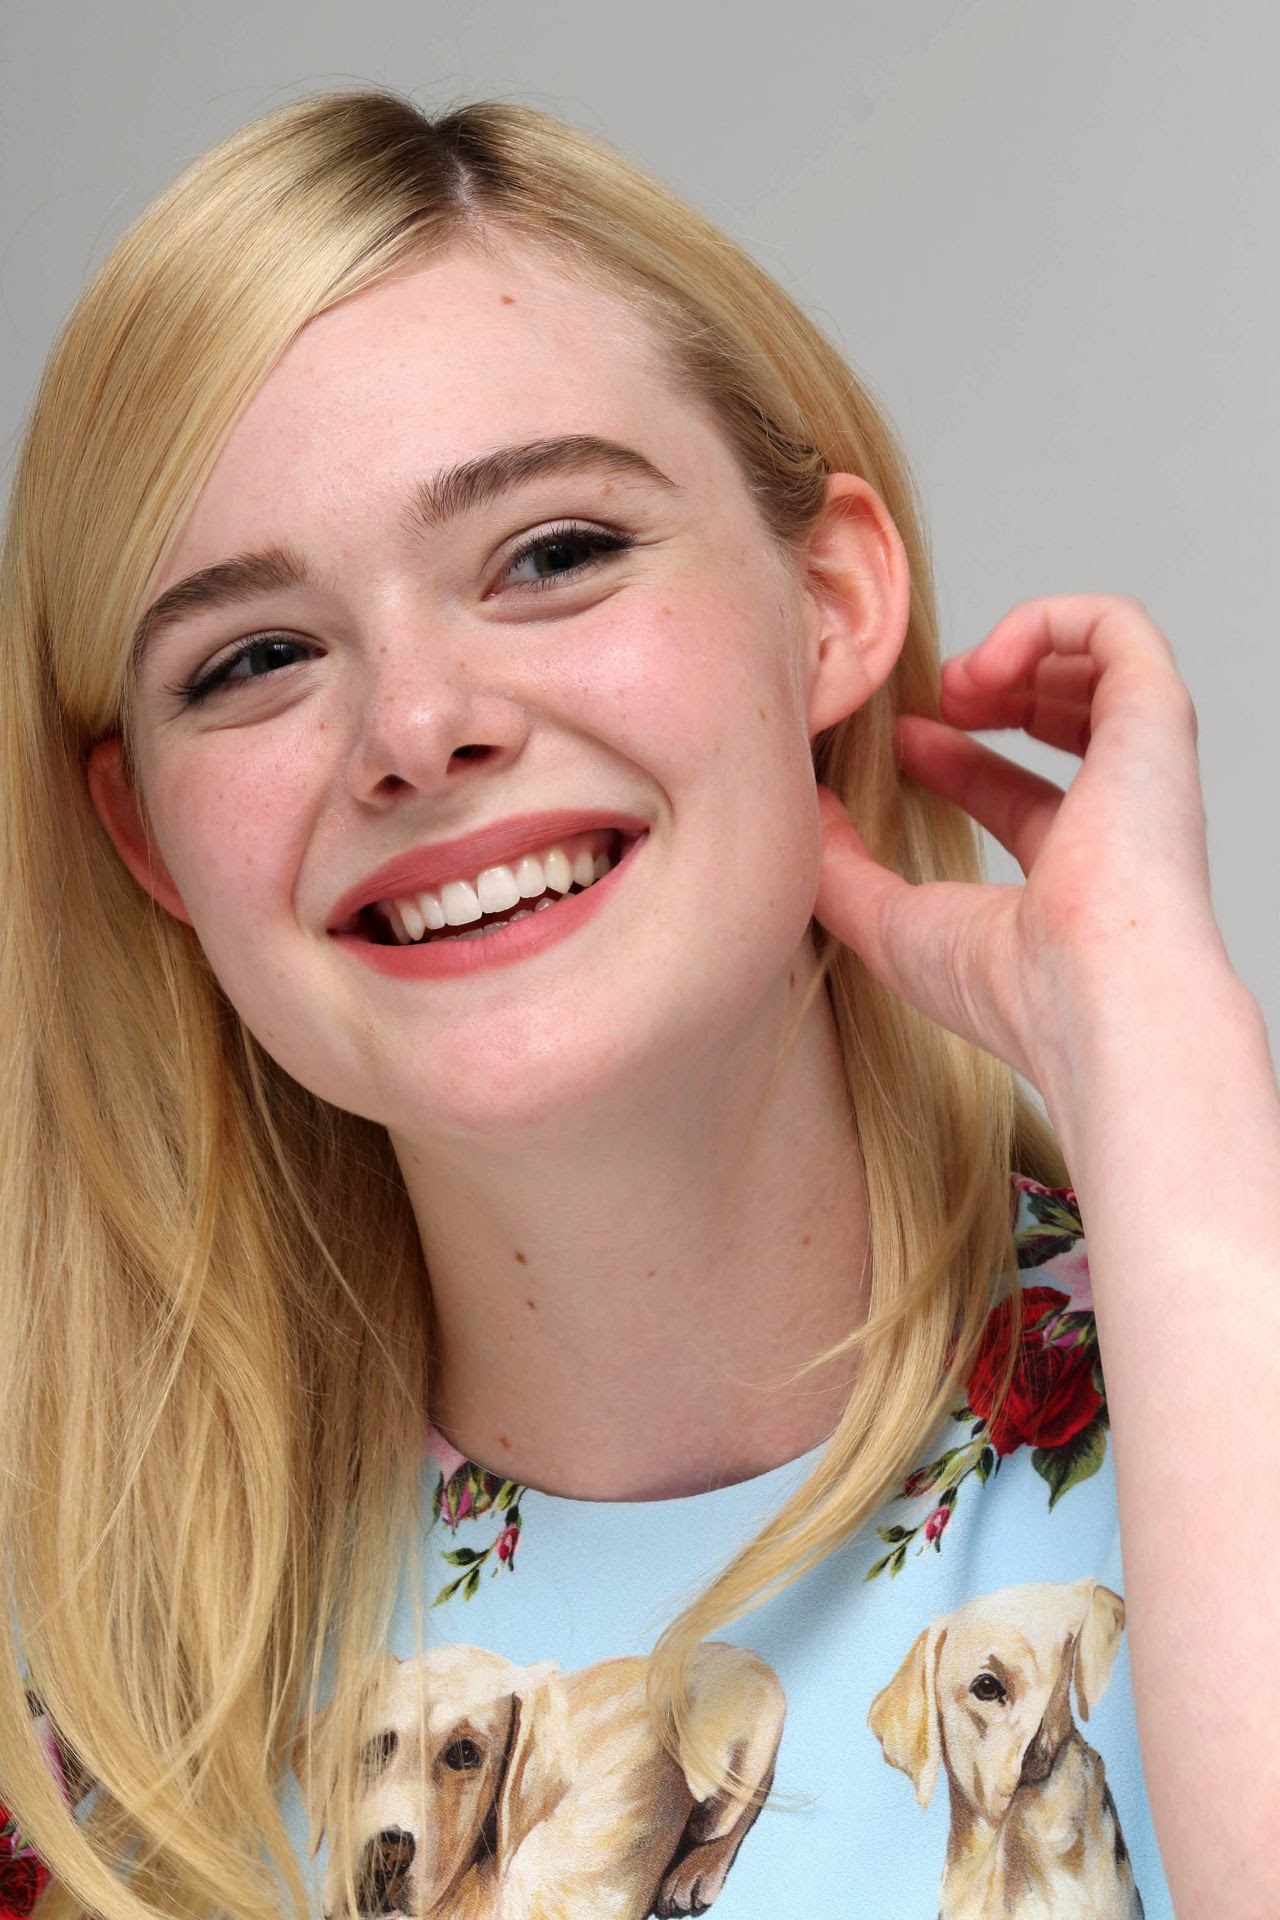 Elle Fanning At The Beguiled Press Conference リメイク版 白い肌の異常な夜 の最新作 ザ ビガイルド の記者会見のエルたん Cia Movie News